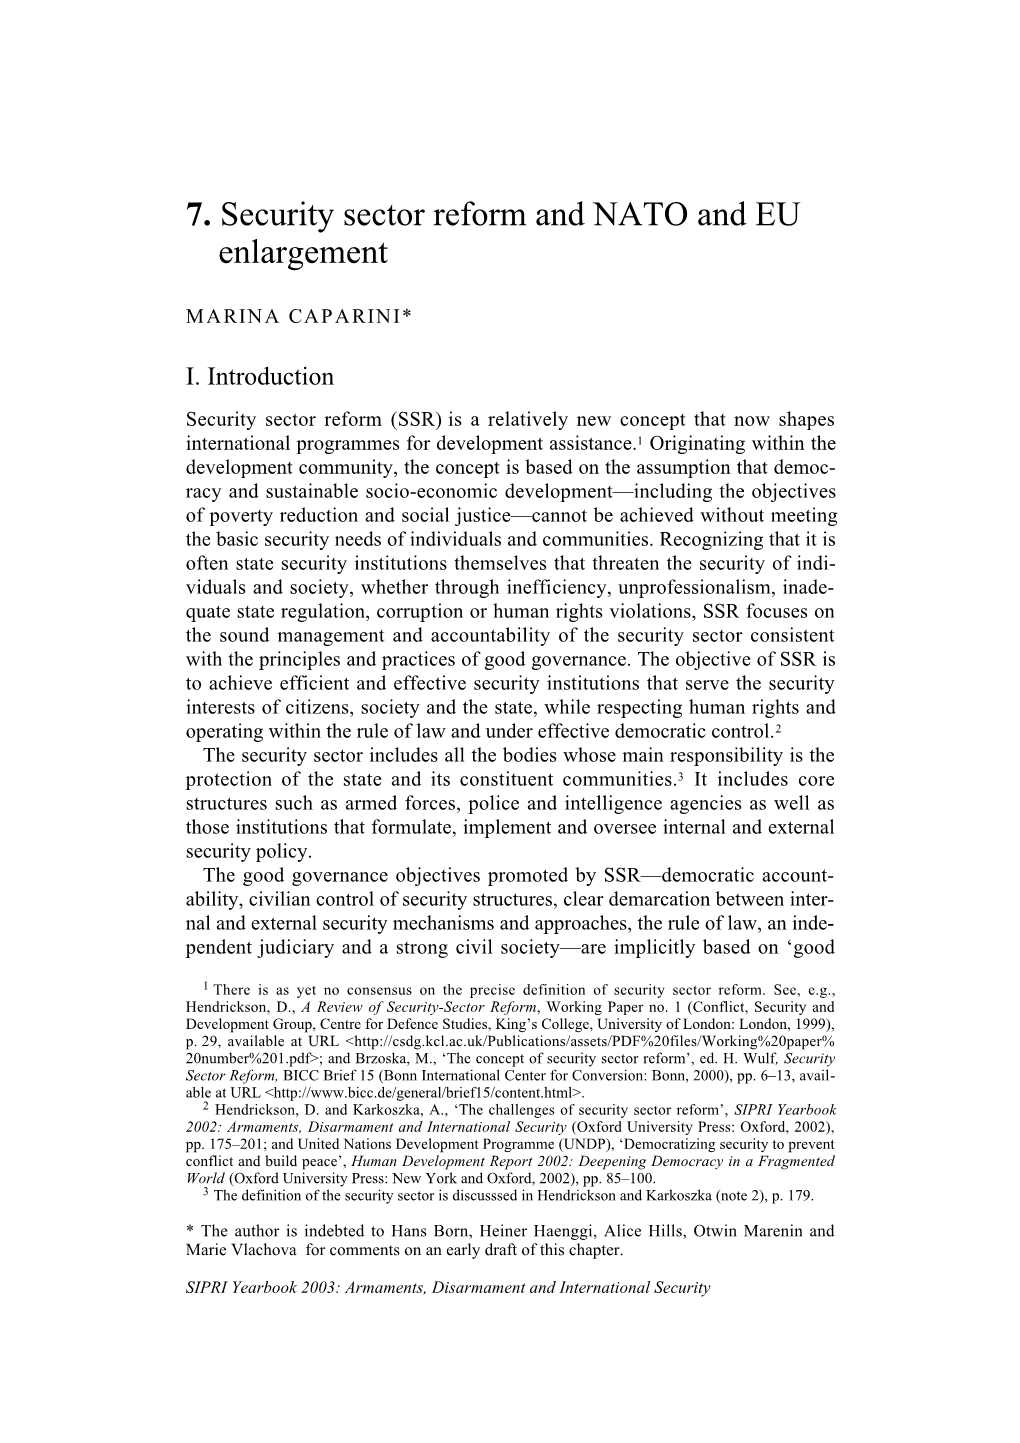 7. Security Sector Reform and NATO and EU Enlargement